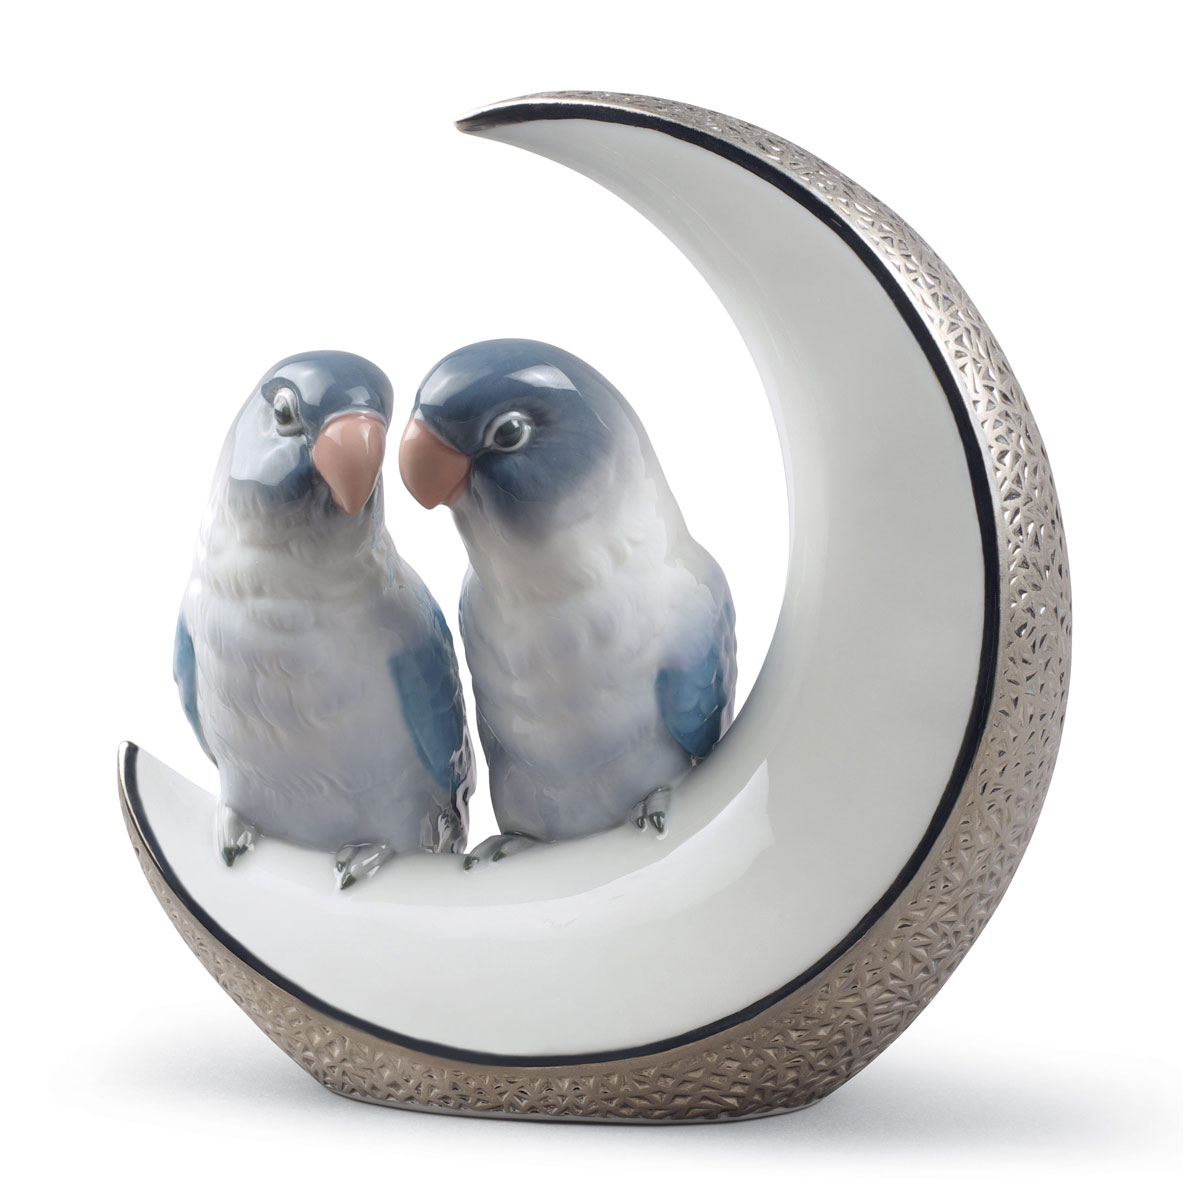 Lladro Classic Sculpture, Fly Me To The Moon Birds Figurine. Silver Lustre